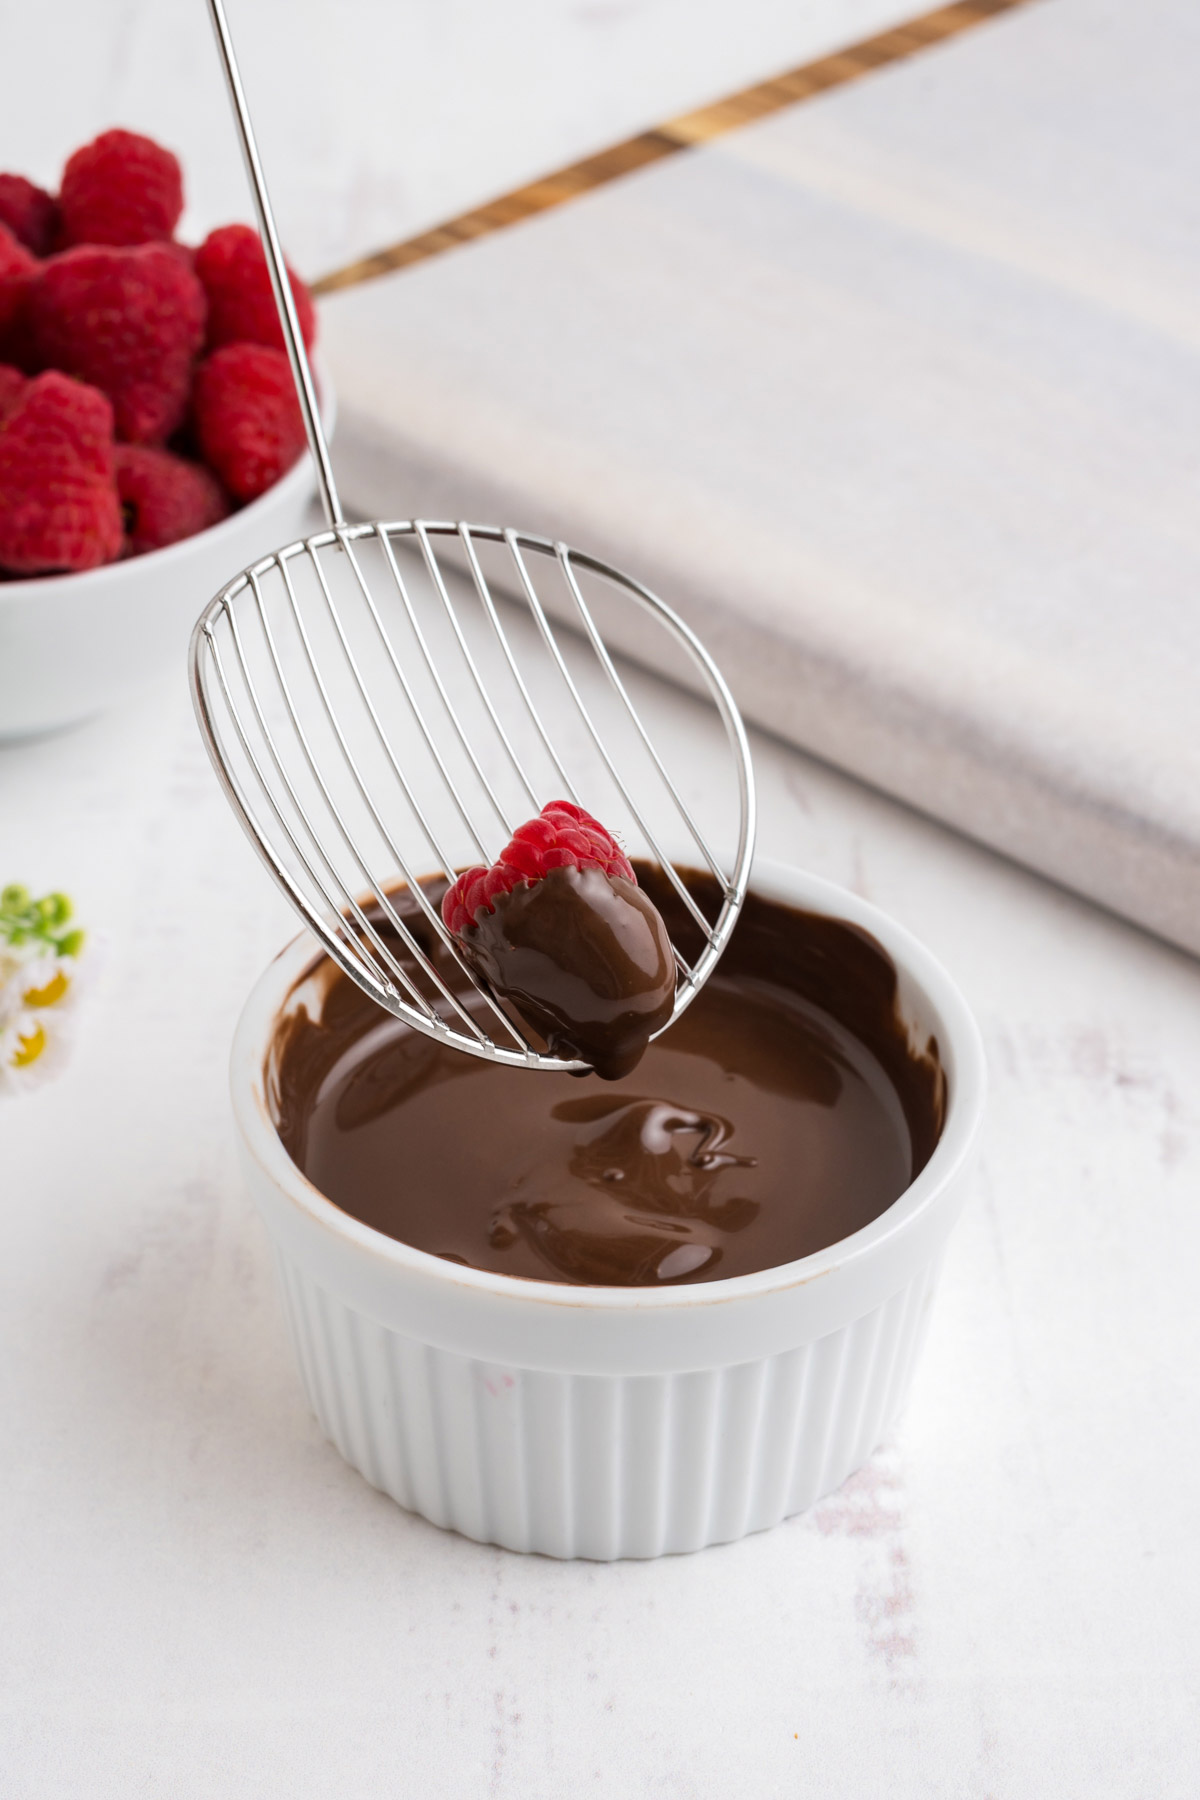 Using a metal slotted spoon to dip a raspberry in chocolate.